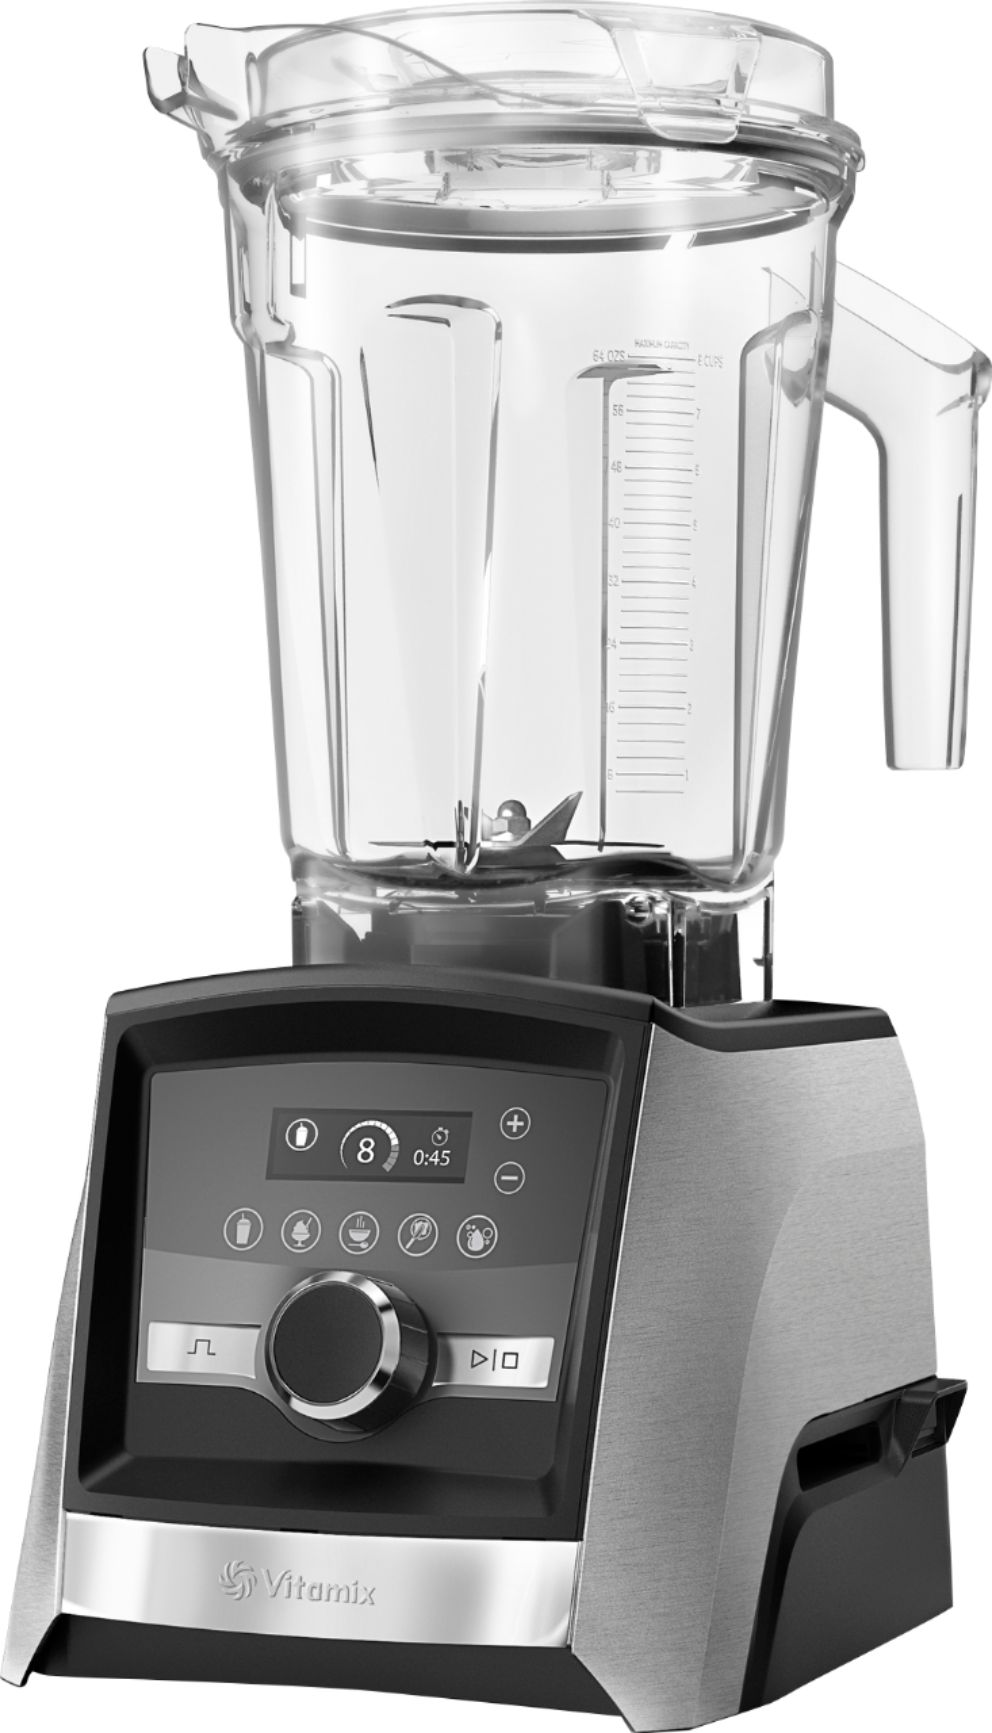 Left View: Vitamix - Ascent Series A3500 Blender - Brushed Stainless Steel